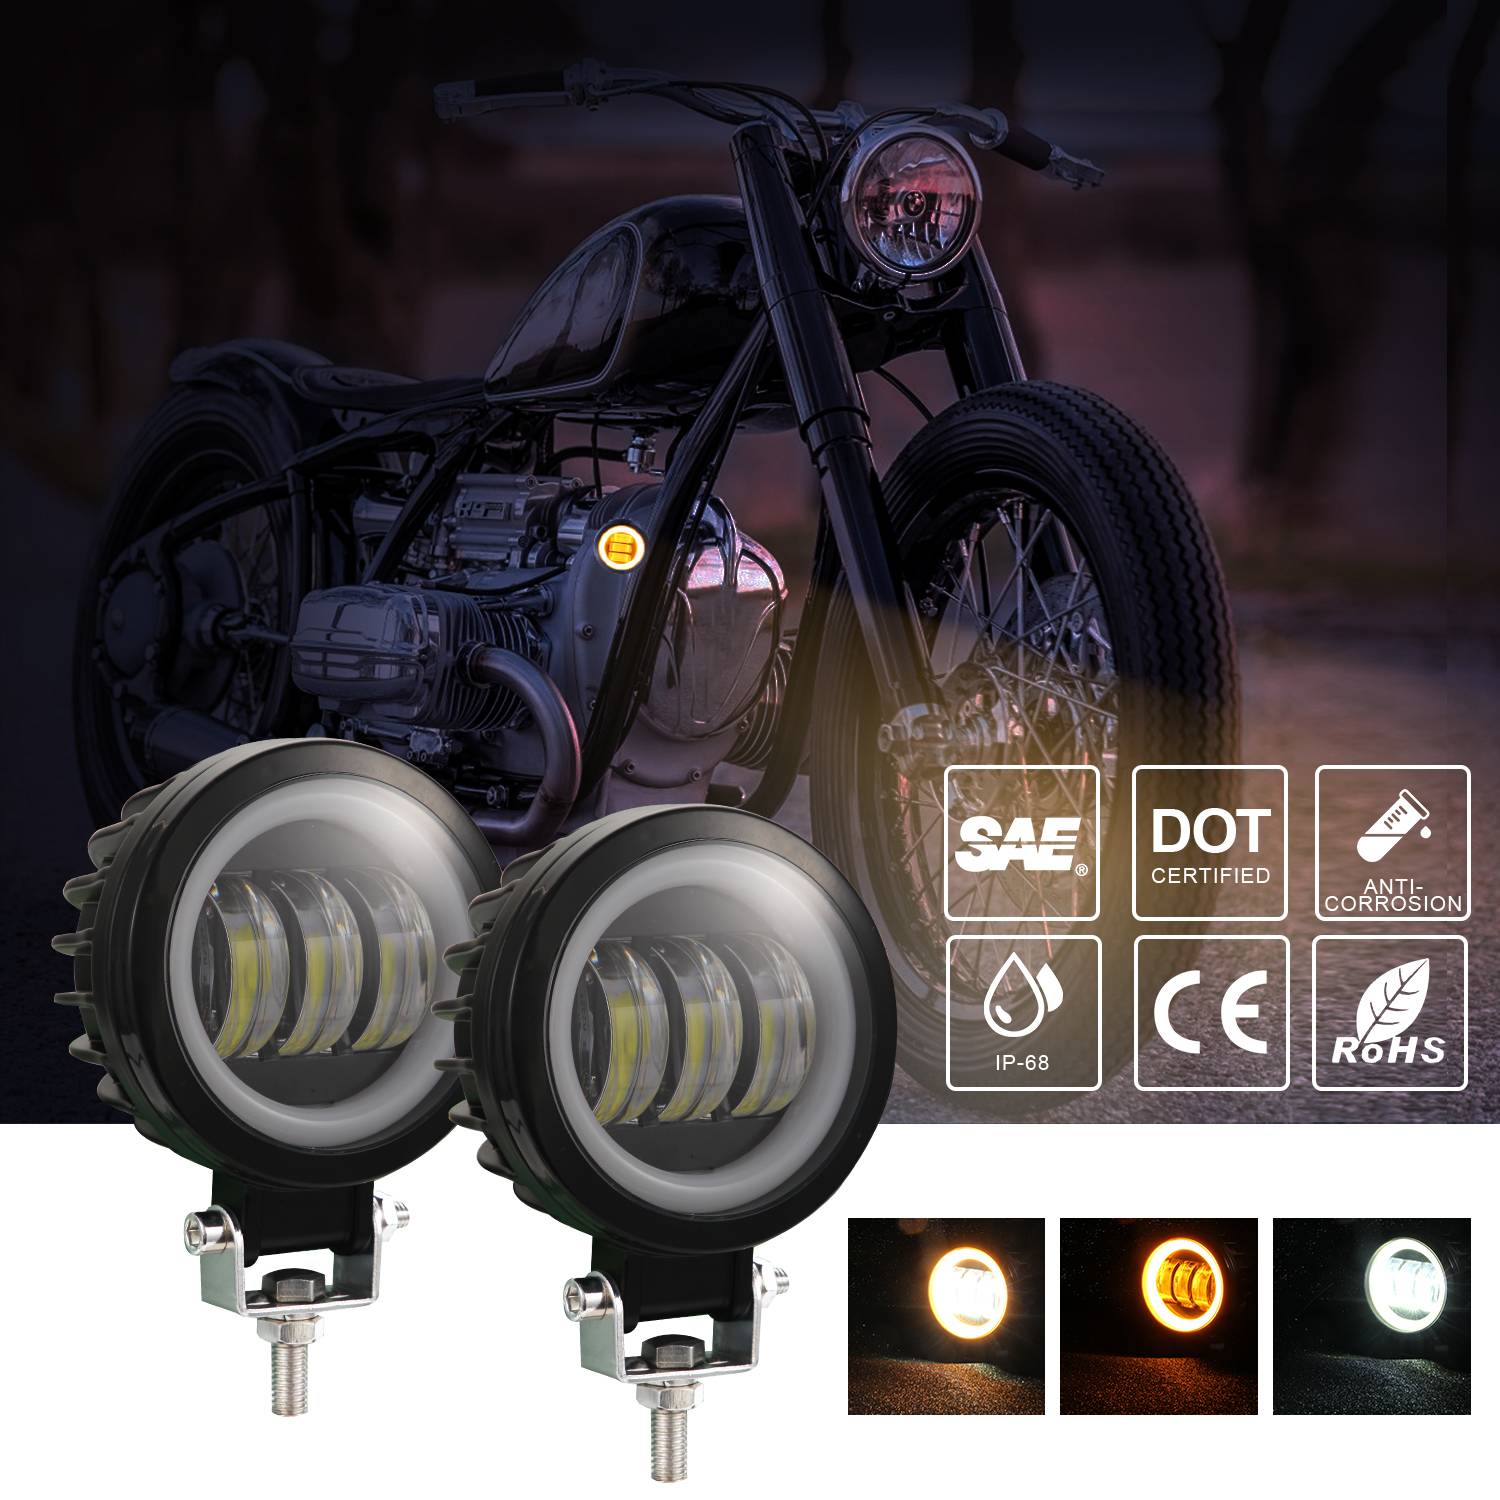 How To Choose An Effective LED Motorcycle Daytime Running Lights?